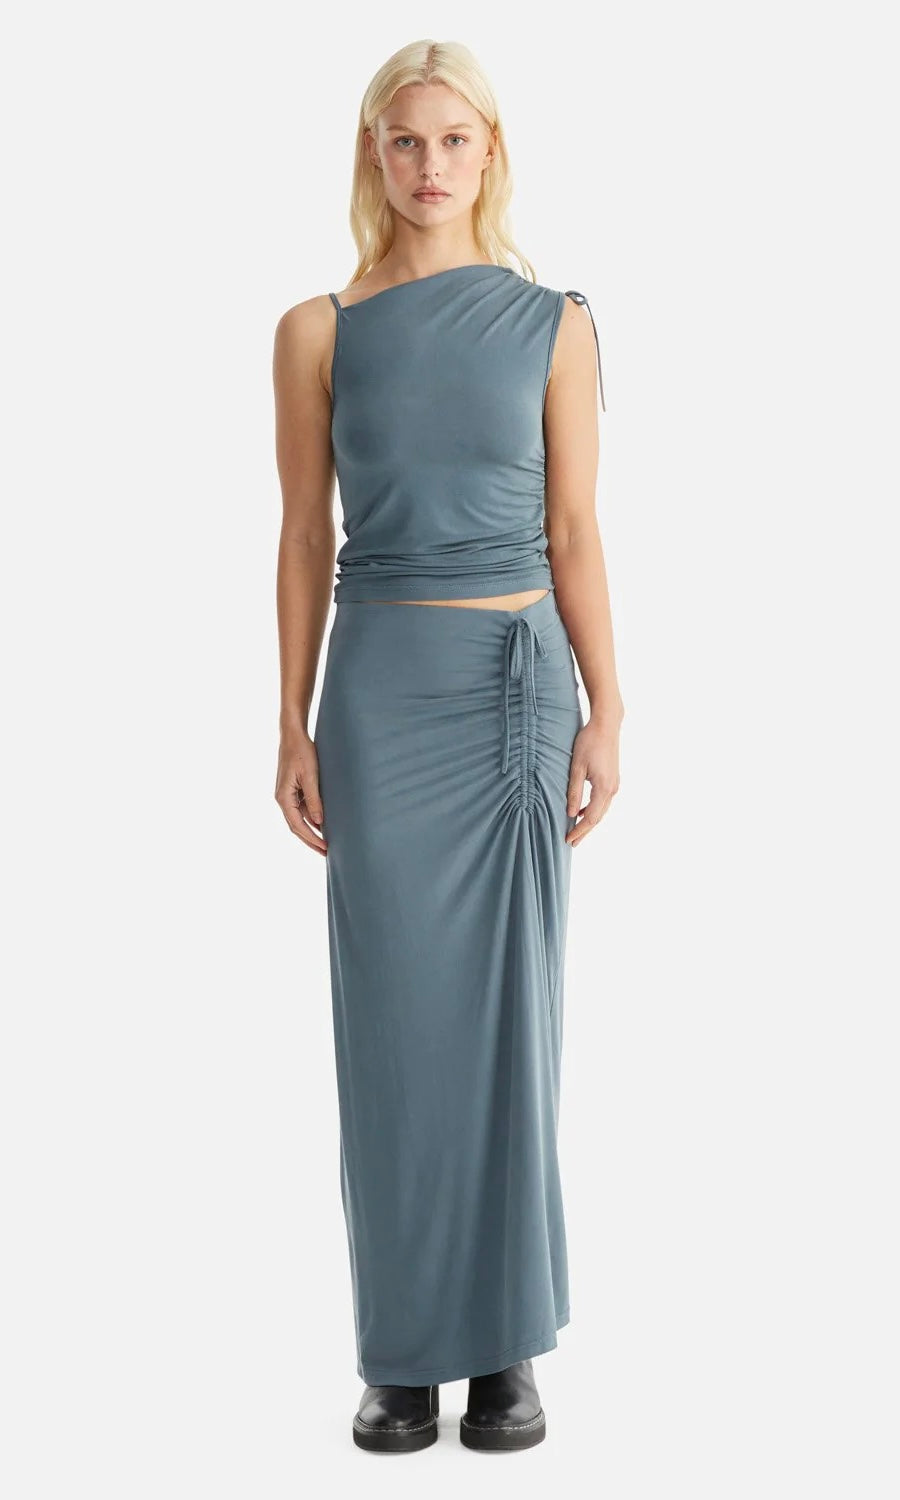 Ena Pelly Joey Ruched Midi Skirt In Teal